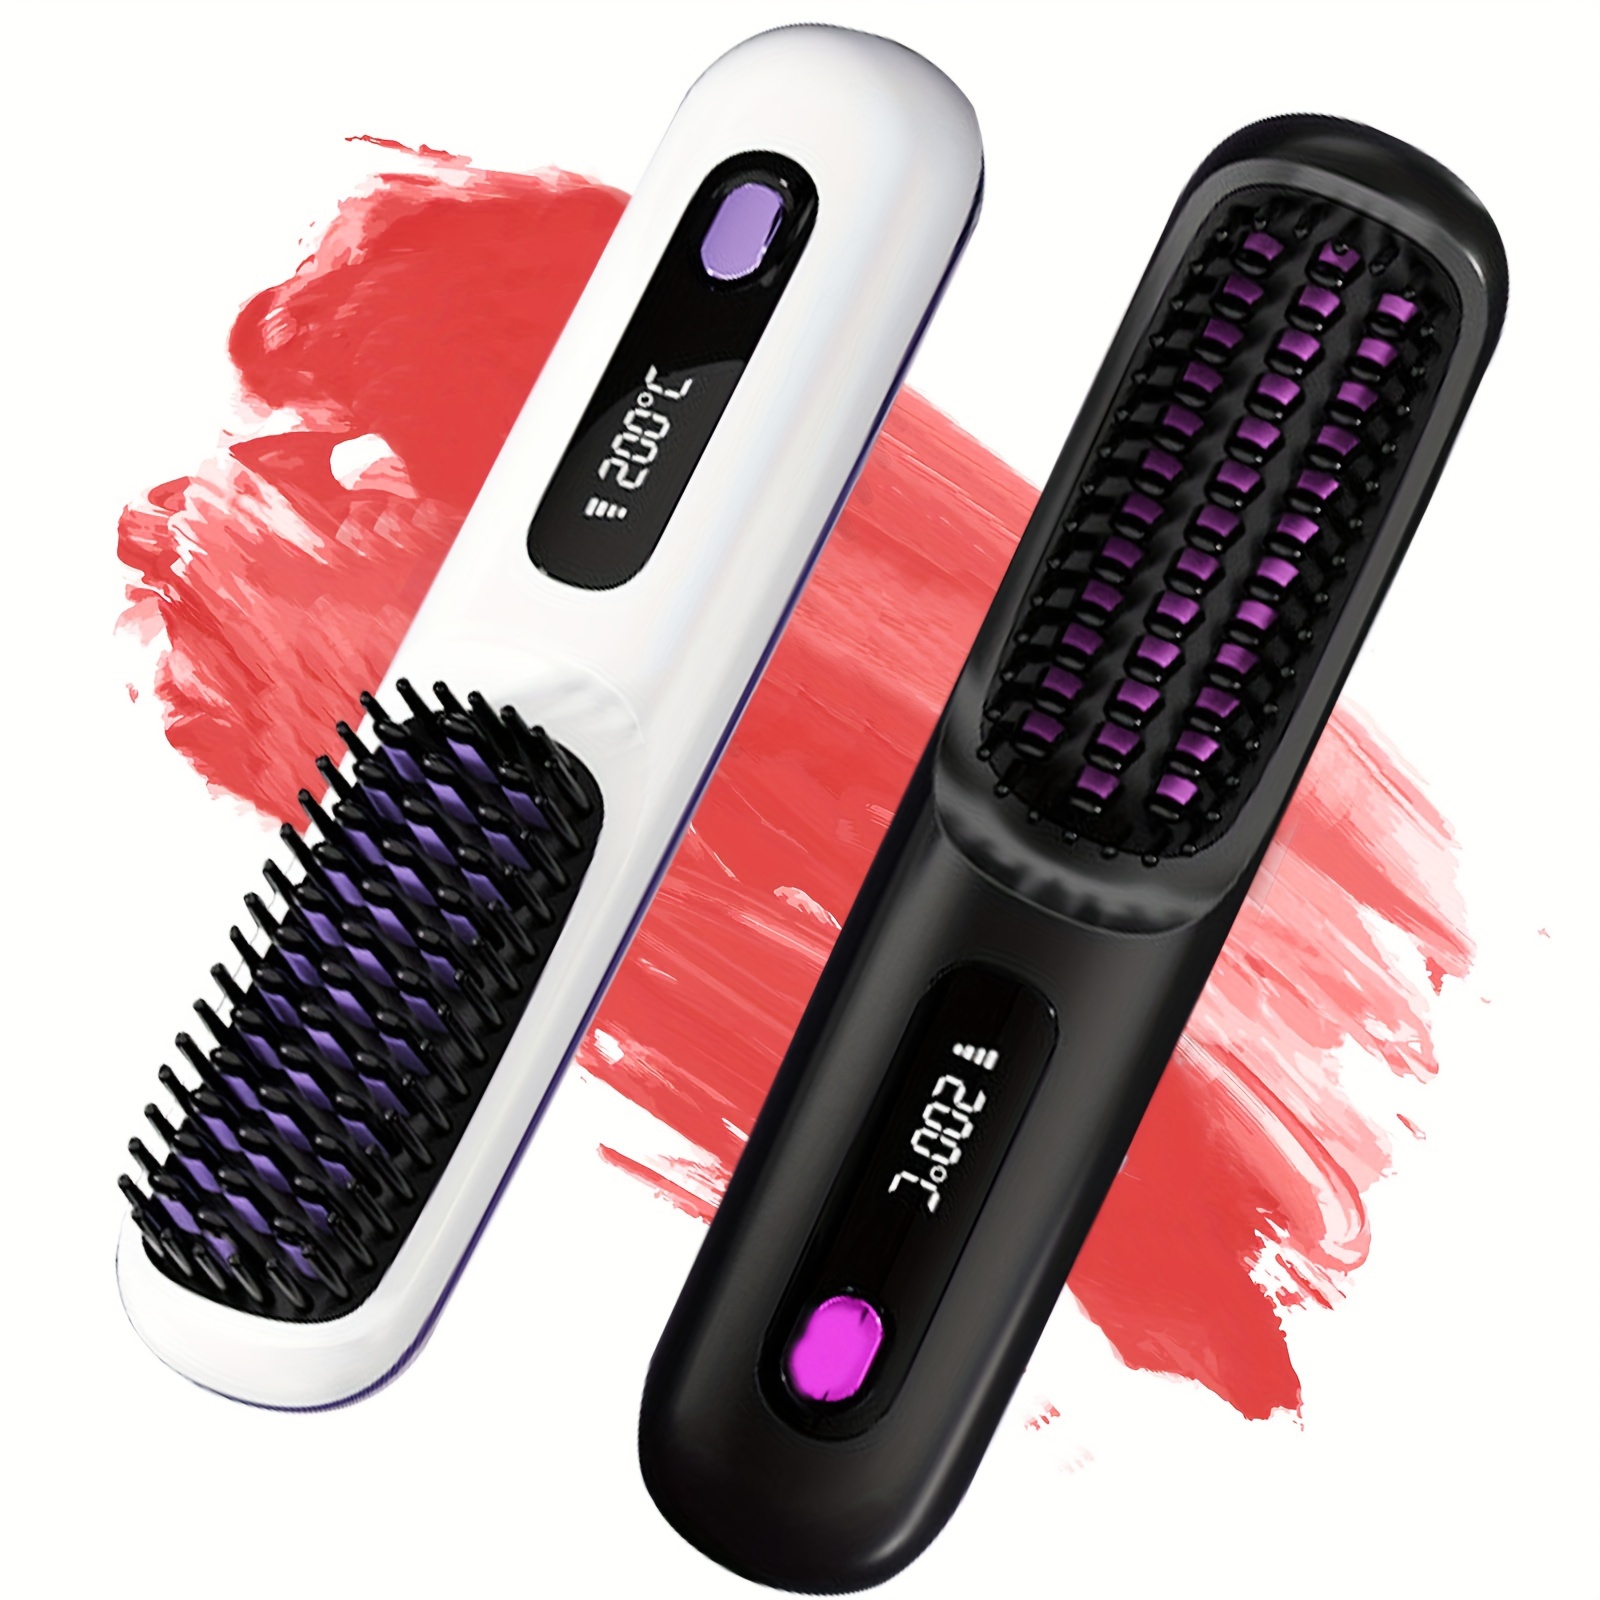 

Cordless Hair Straightener Brush, Portable Negative Ion Hot Comb, Usb Rechargeable, Fast Heating 3 Temp Settings, Anti-scald, For Travel Daily Use, Gifts For Women